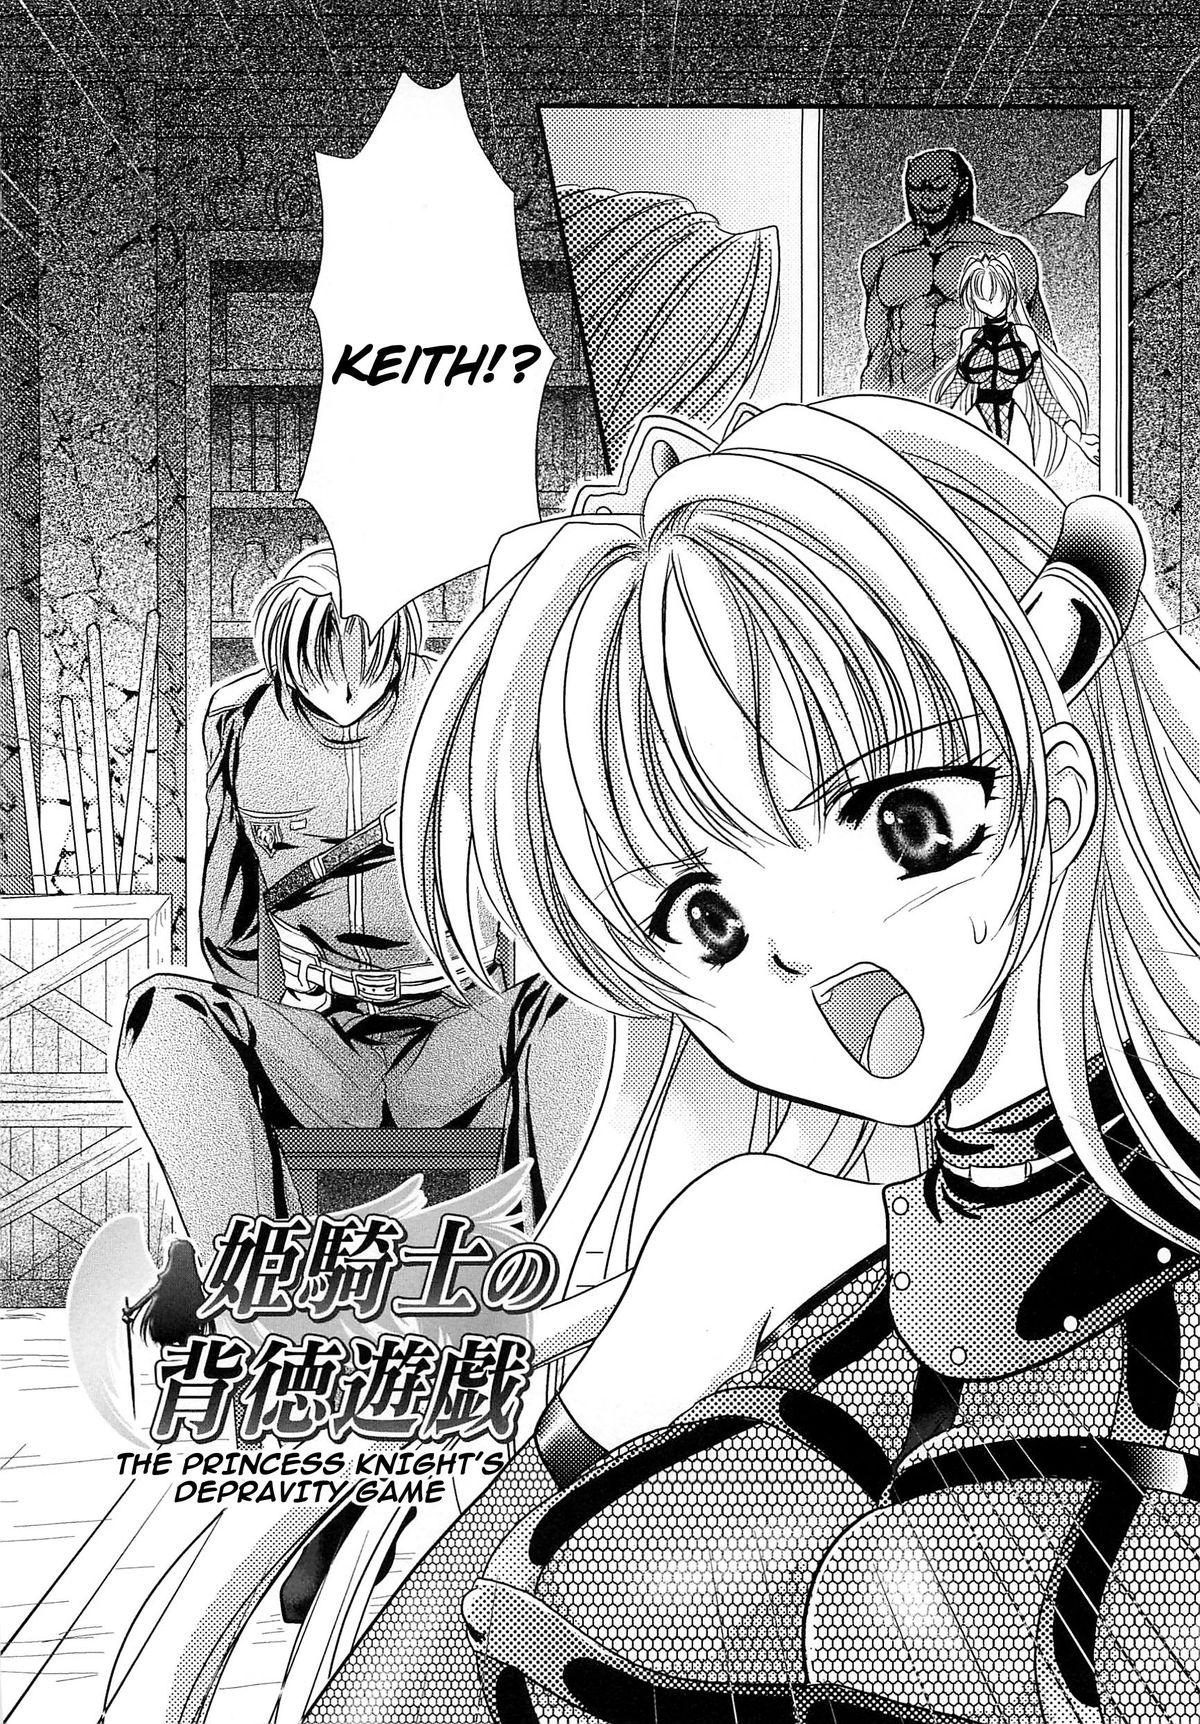 Indonesia The Princess Knight's Depravity Game - Inda no himekishi janne Young Old - Page 2